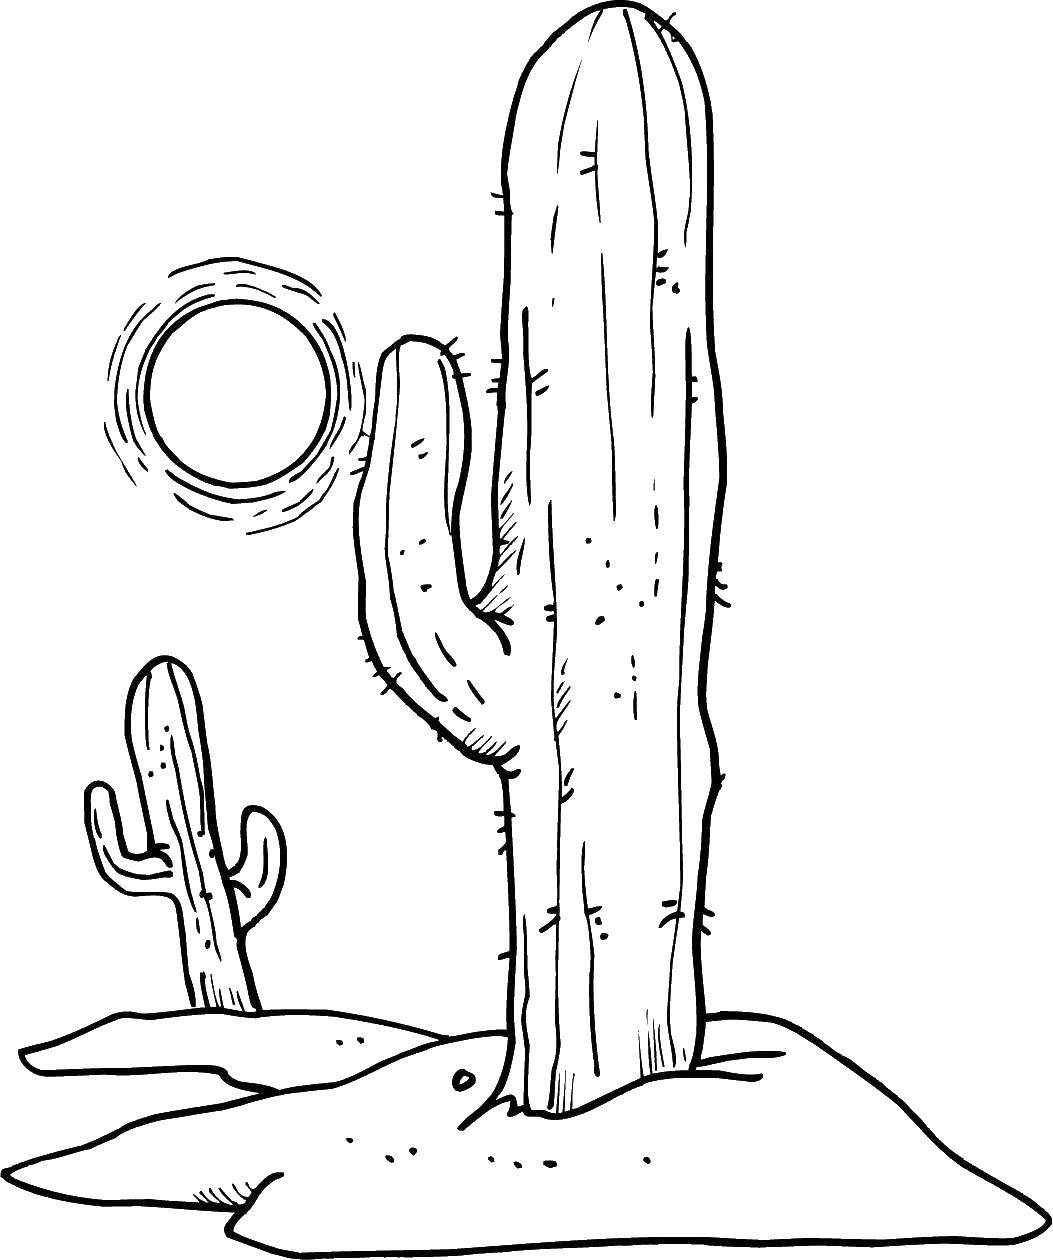 Coloring Cacti in the desert. Category cactus. Tags:  cactus, desert, plants.